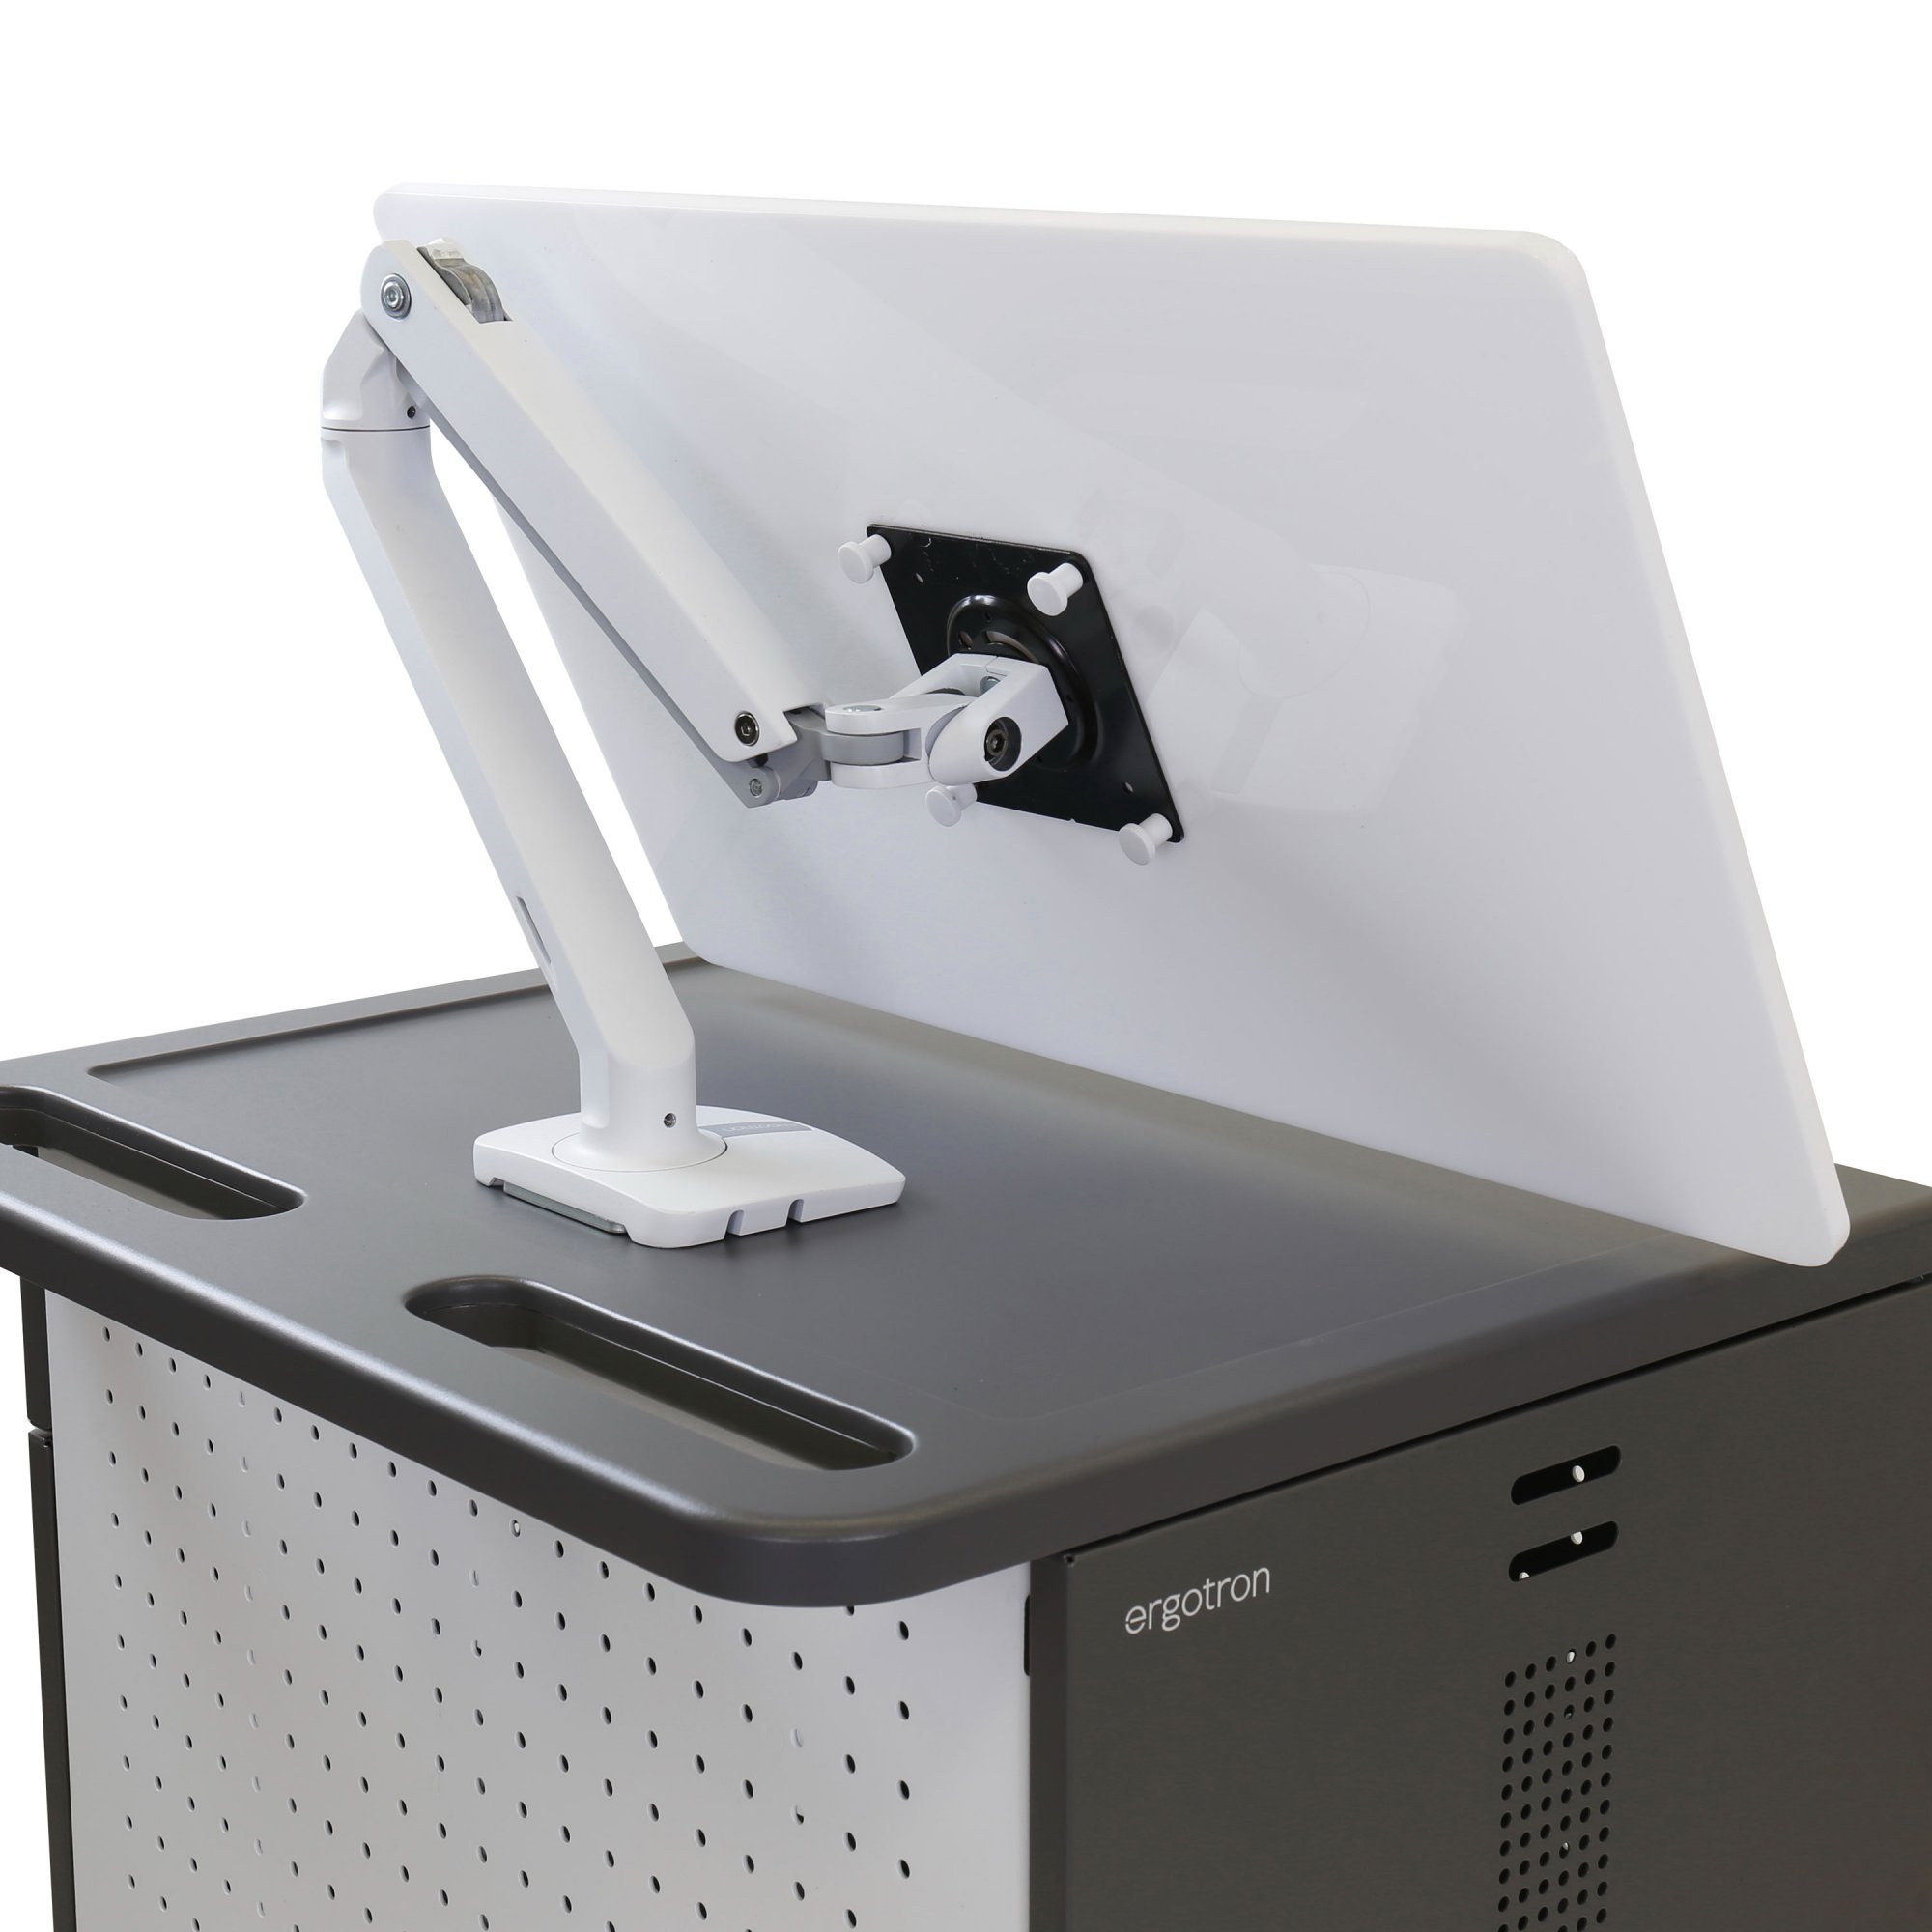 Whiteboard attachment - Securely mounts to a monitor arm with a VESA plate